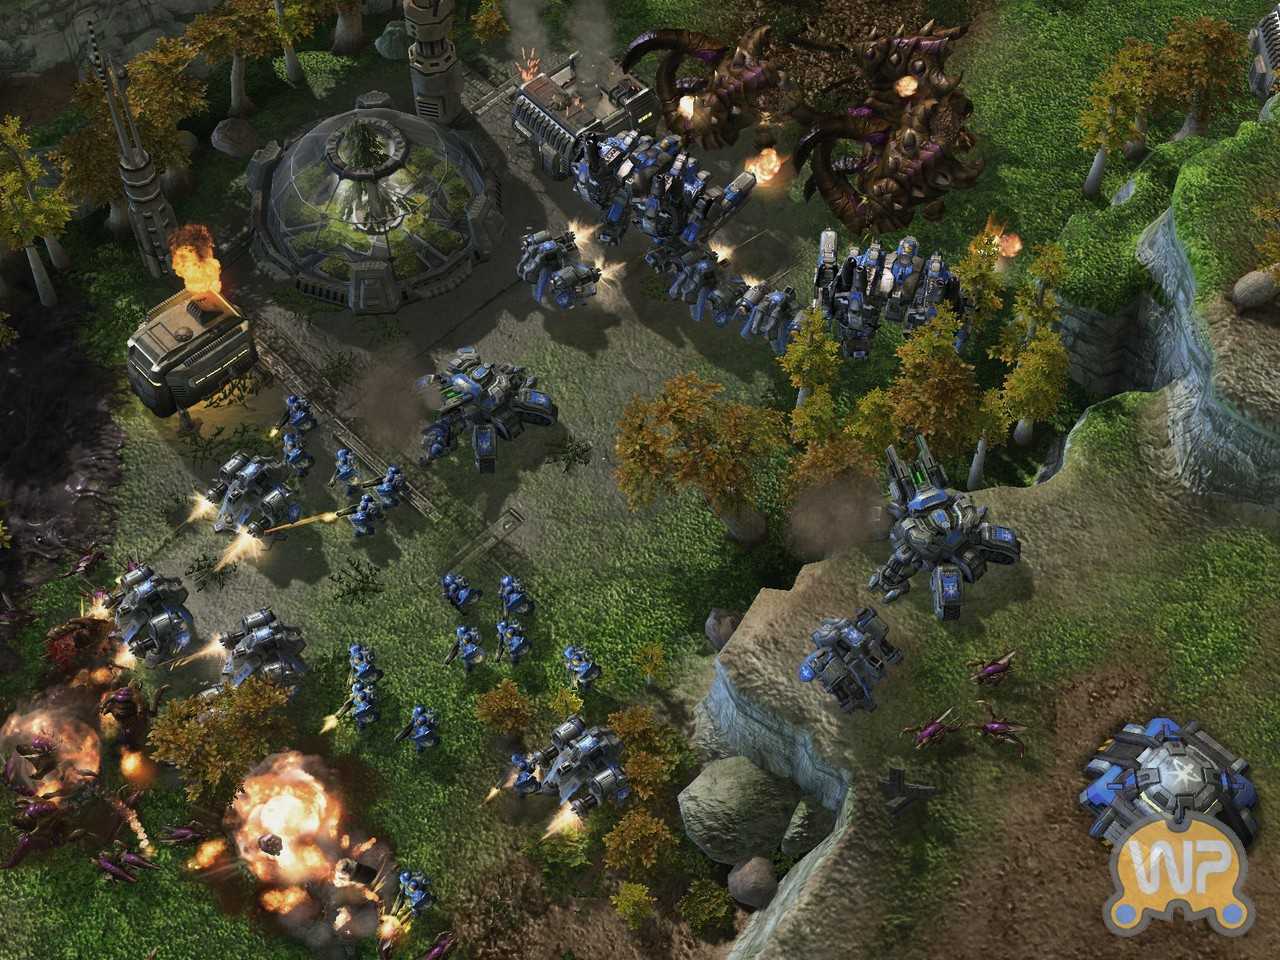 Старкрафт 2005. STARCRAFT II Wings of Liberty. Старкрафт 2 Геттисберг. STARCRAFT 2 2010.